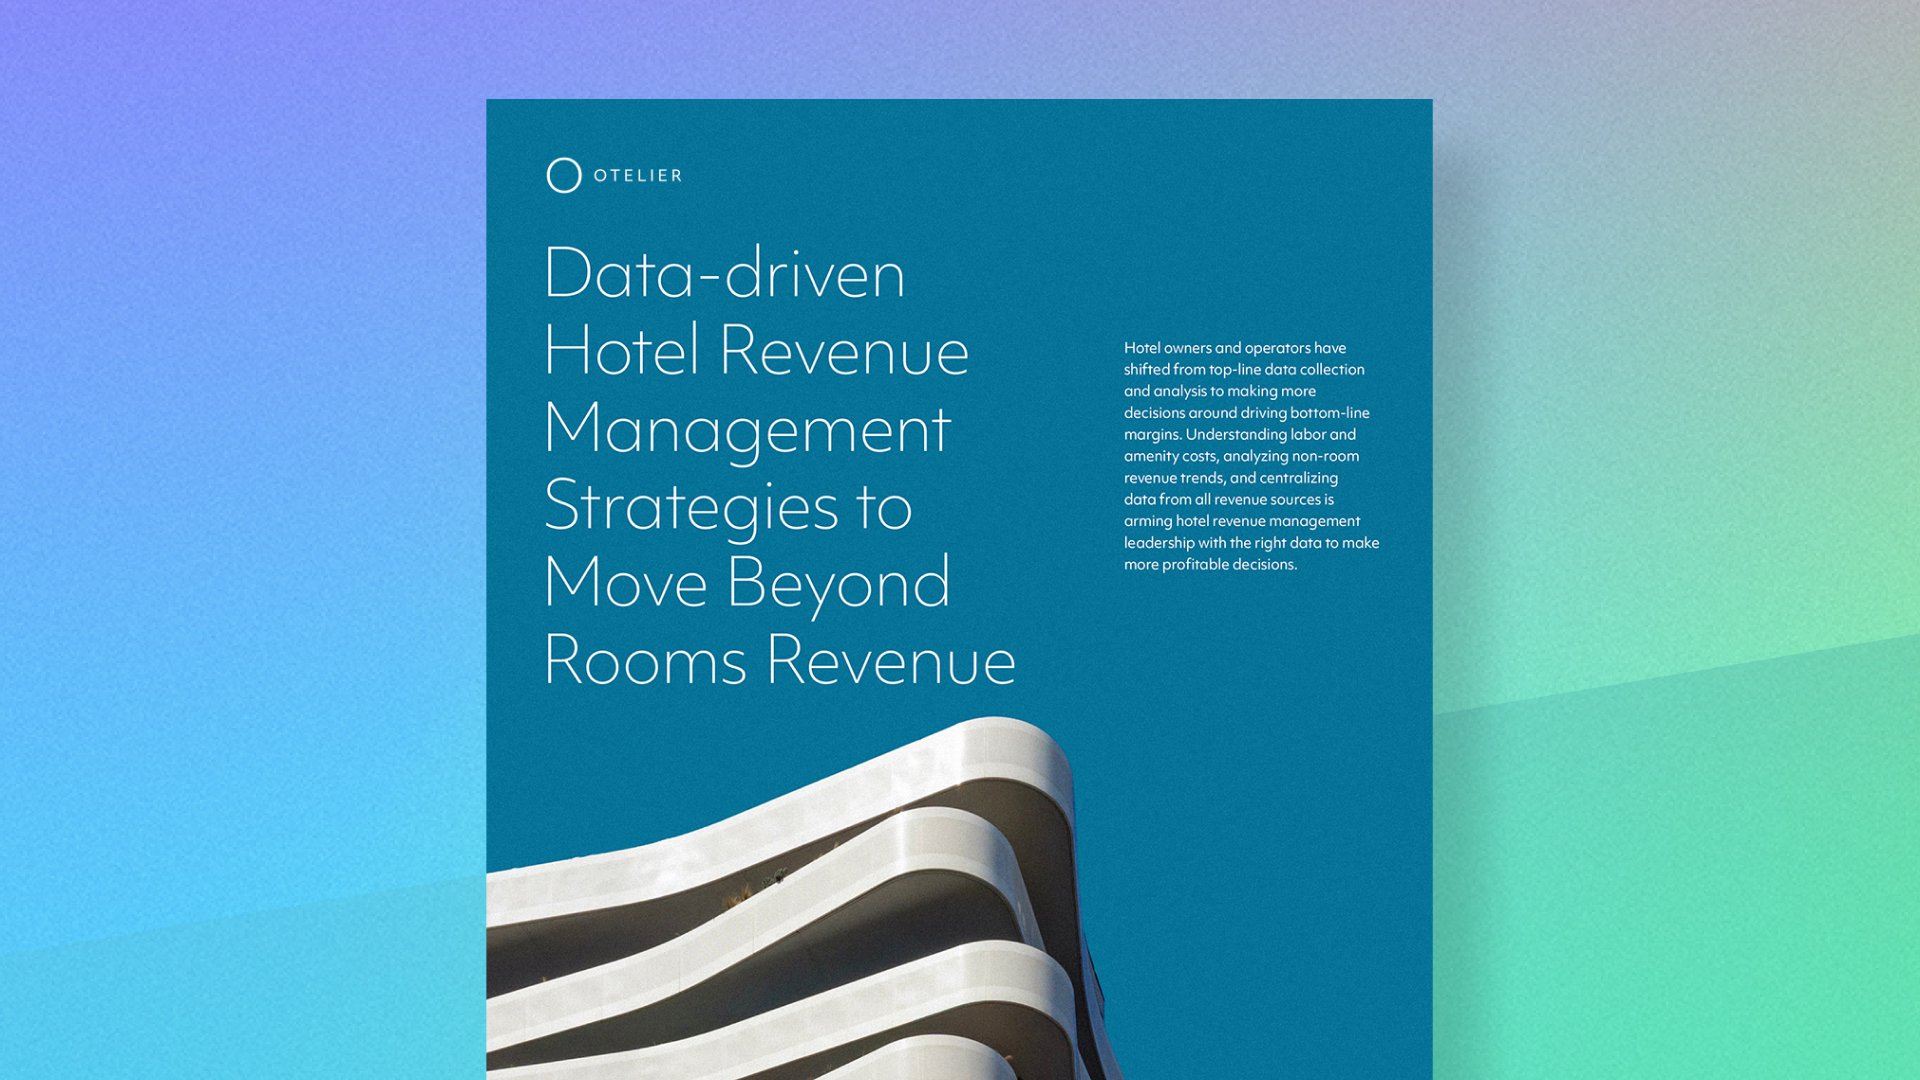 Data-driven Hotel Revenue Management Strategies to Move Beyond Rooms Revenue